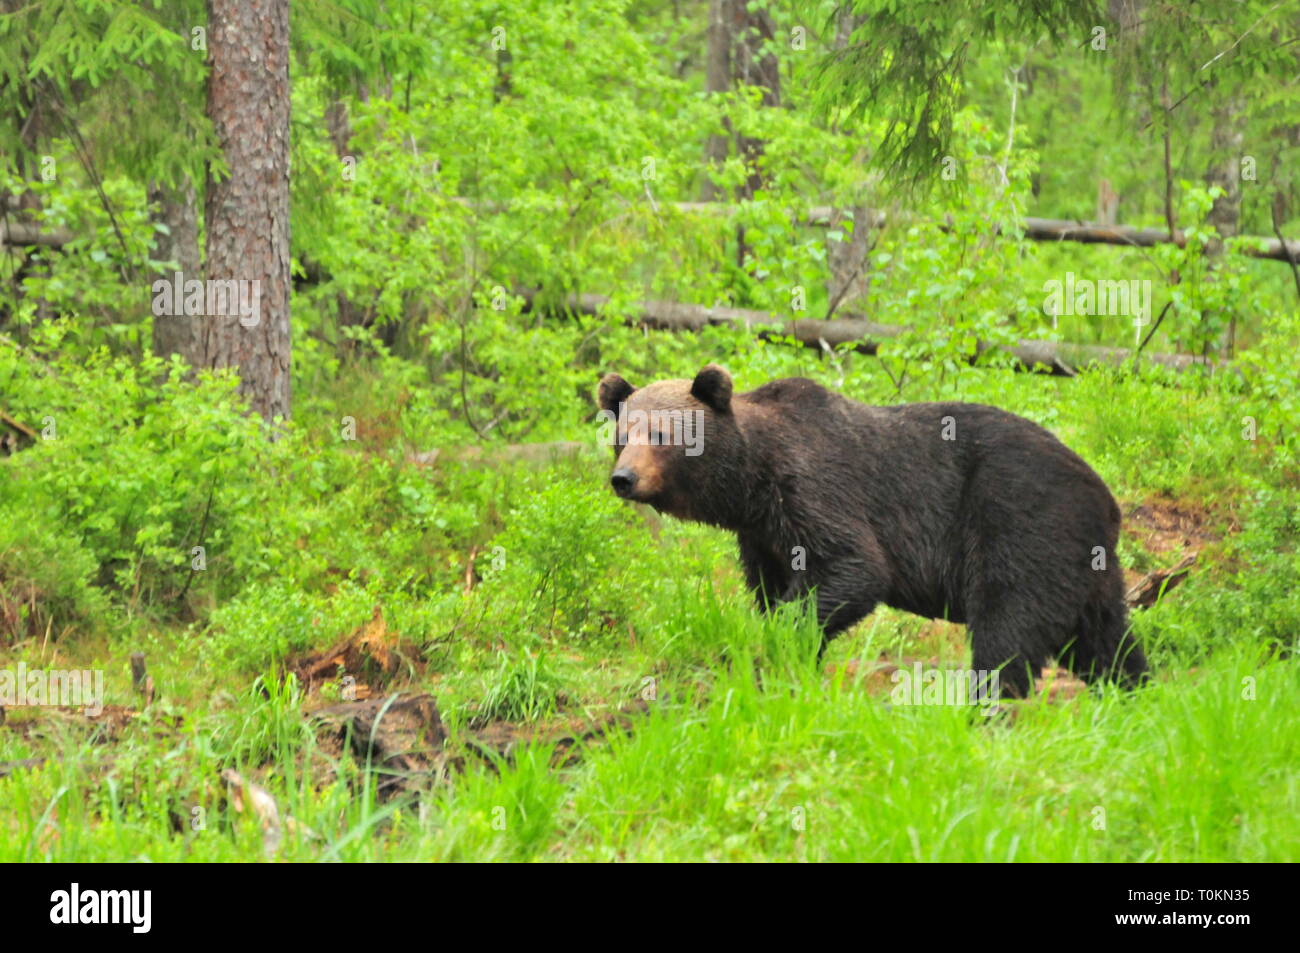 Brown bear (Ursus arctos) in the forest Stock Photo